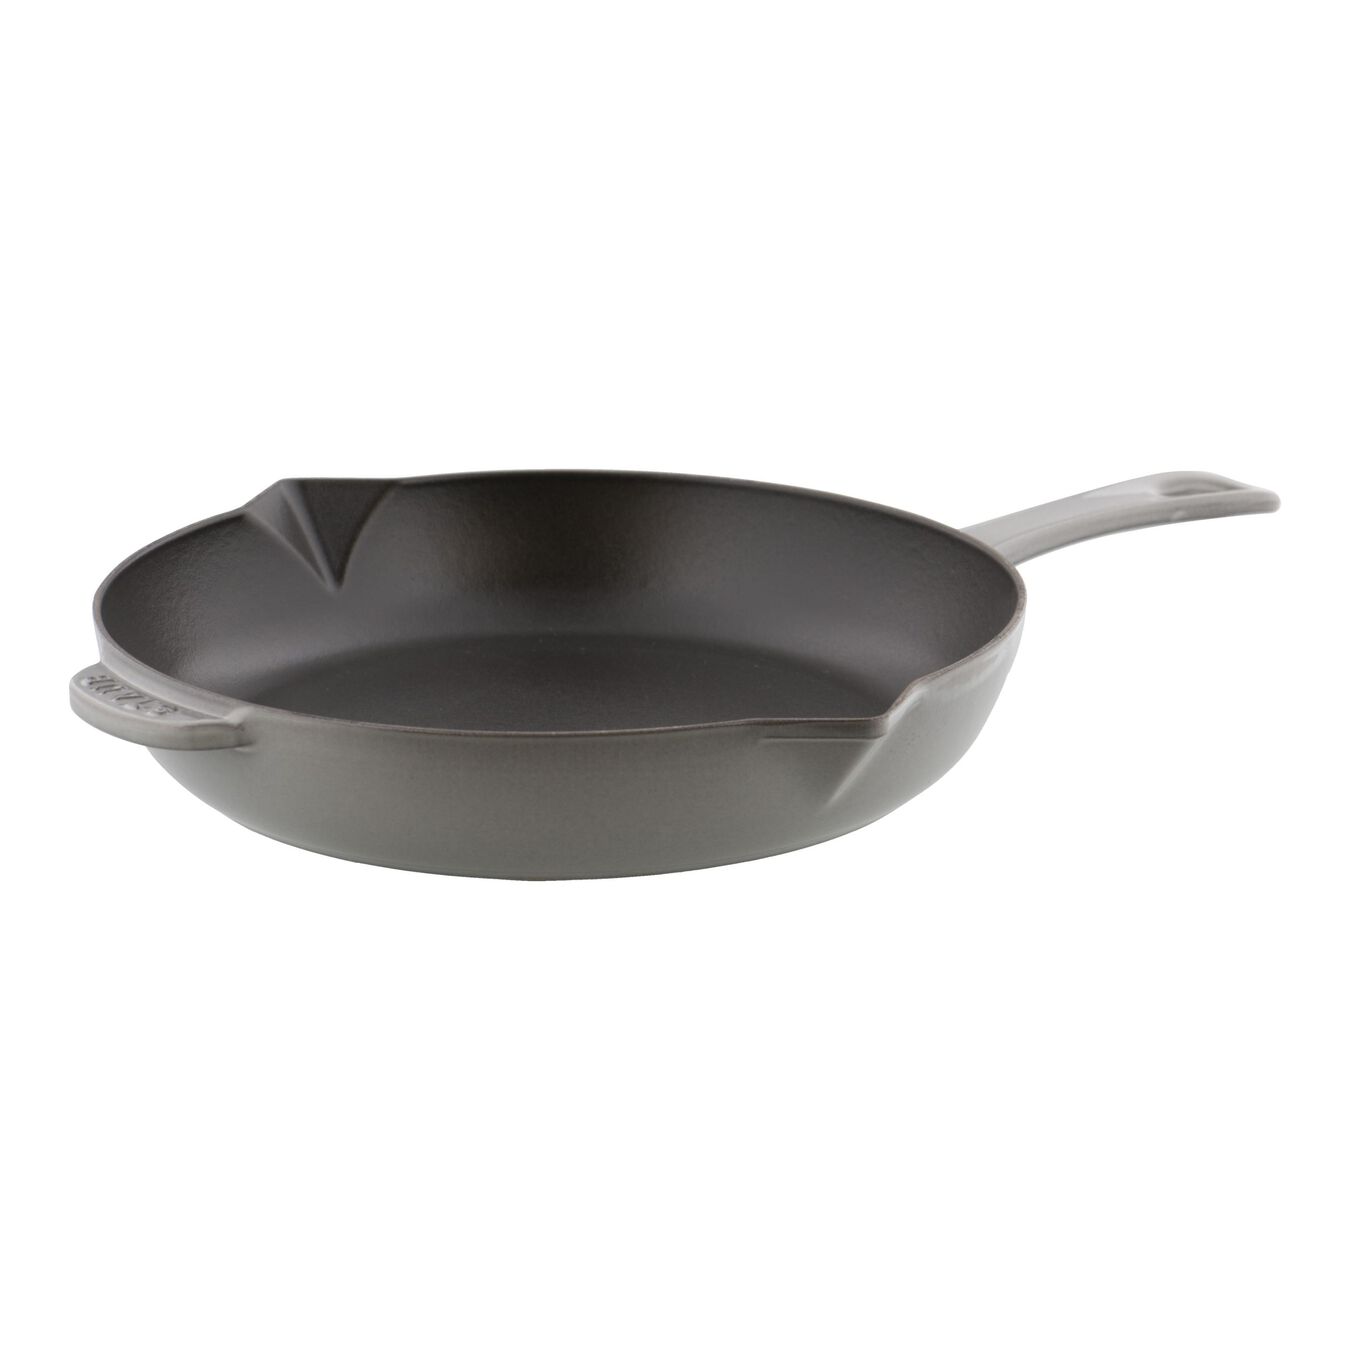 26 cm Cast iron Frying pan with pouring spout graphite-grey,,large 1